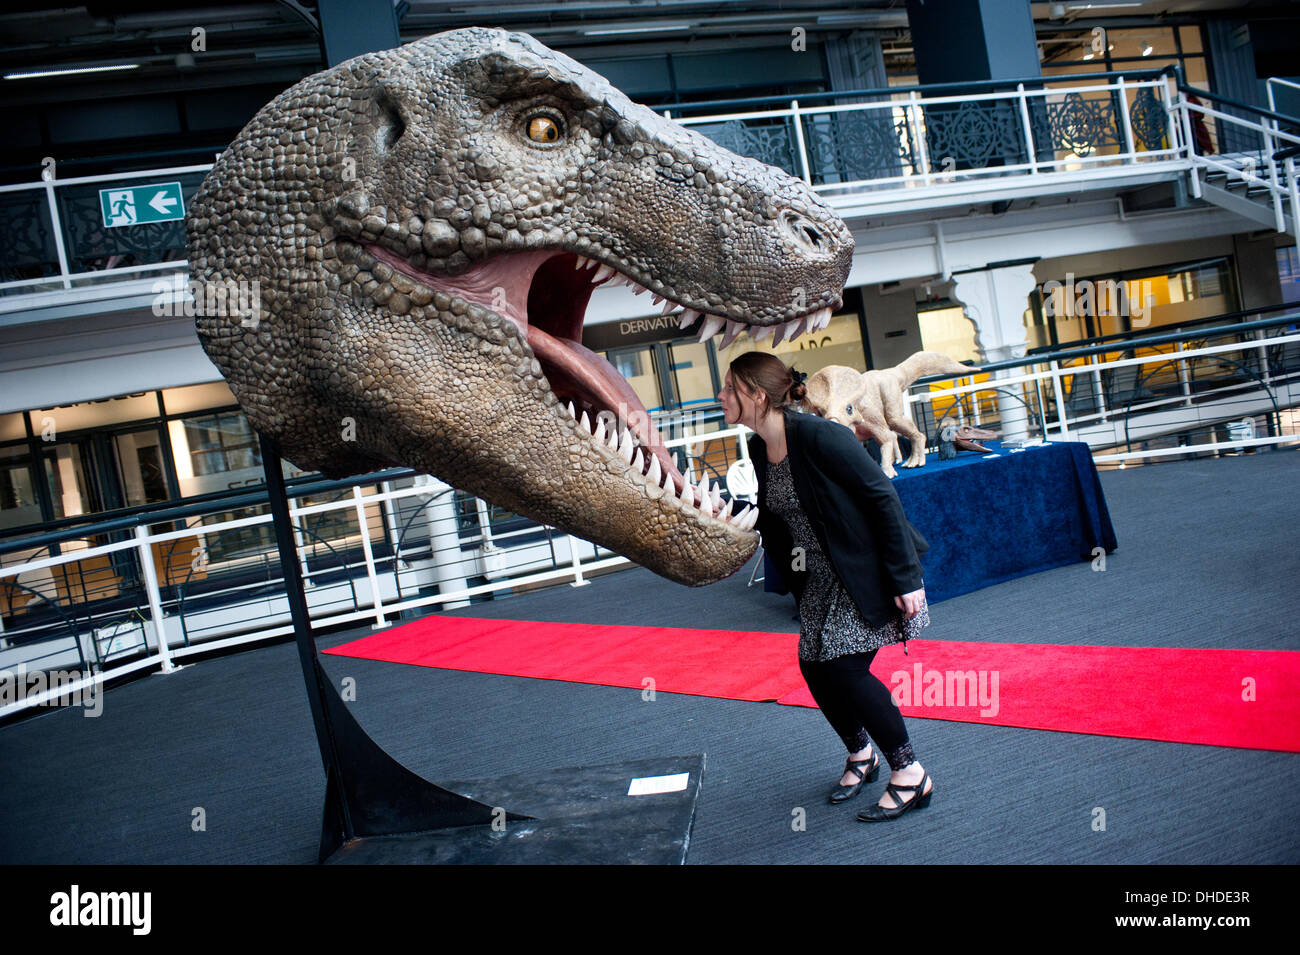 London, UK. 7th November 2013. Cyrielle Langiaux of Crea' Zaurus 3D poses next to a 3D printed Tyrannosaurus Rex head, printed by Arketyp 3D, at the 3D Printshow at the Business Design Centre in London. Credit:  Piero Cruciatti/Alamy Live News Stock Photo